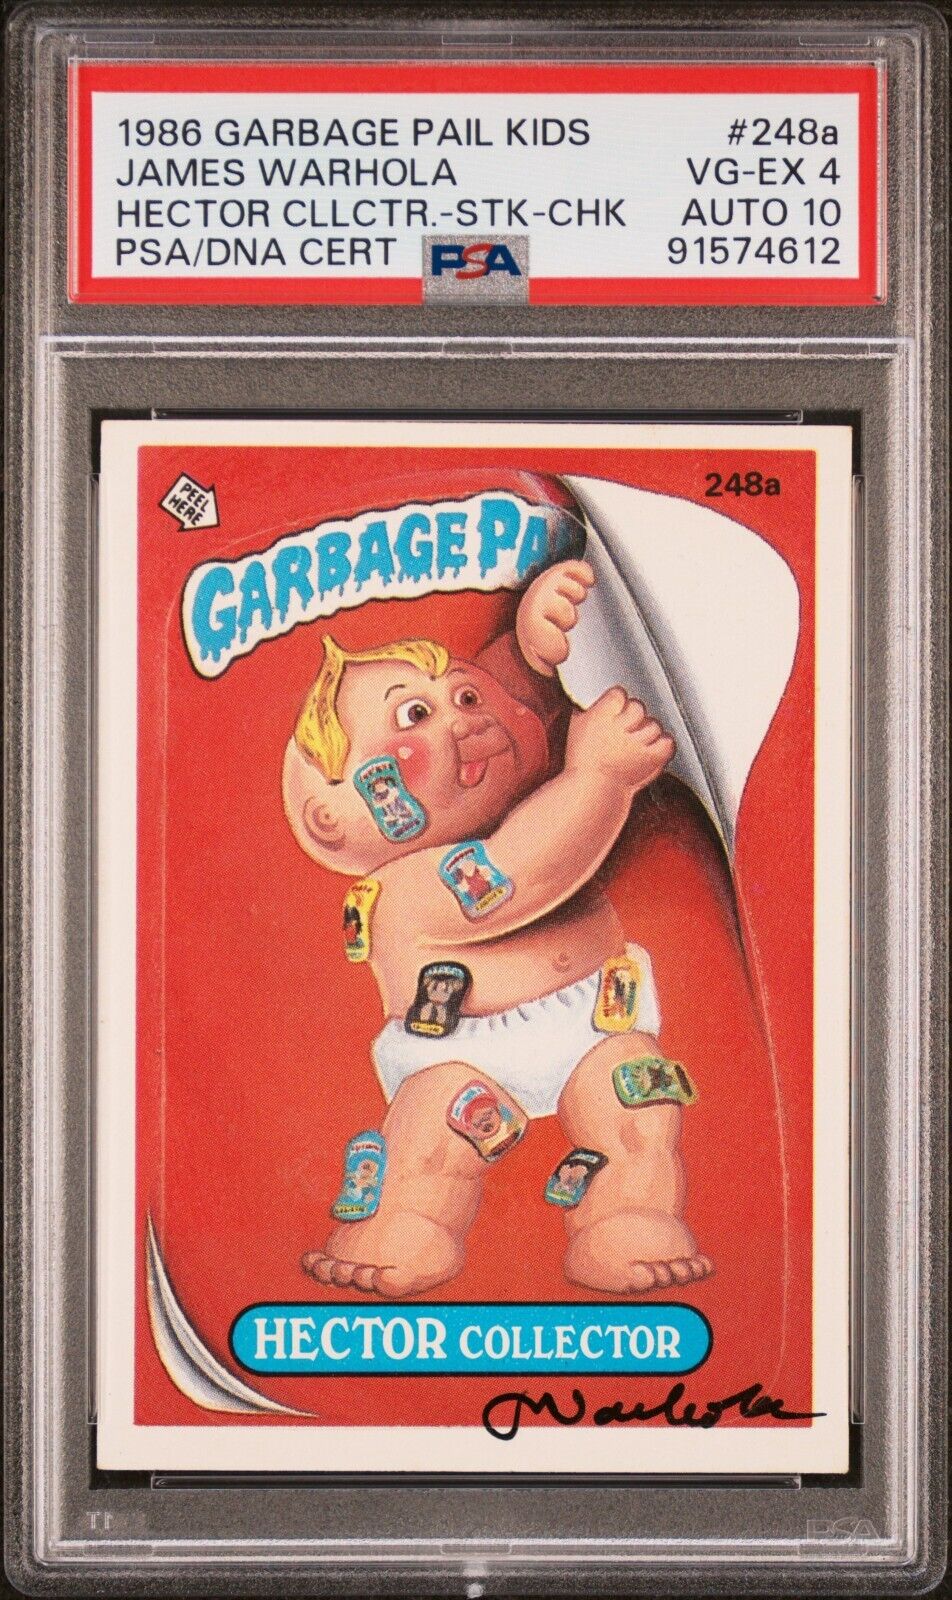 James Warhola Autograph 1986 Garbage Pail Kids 248a Hector Collector PSA 10 AUTO